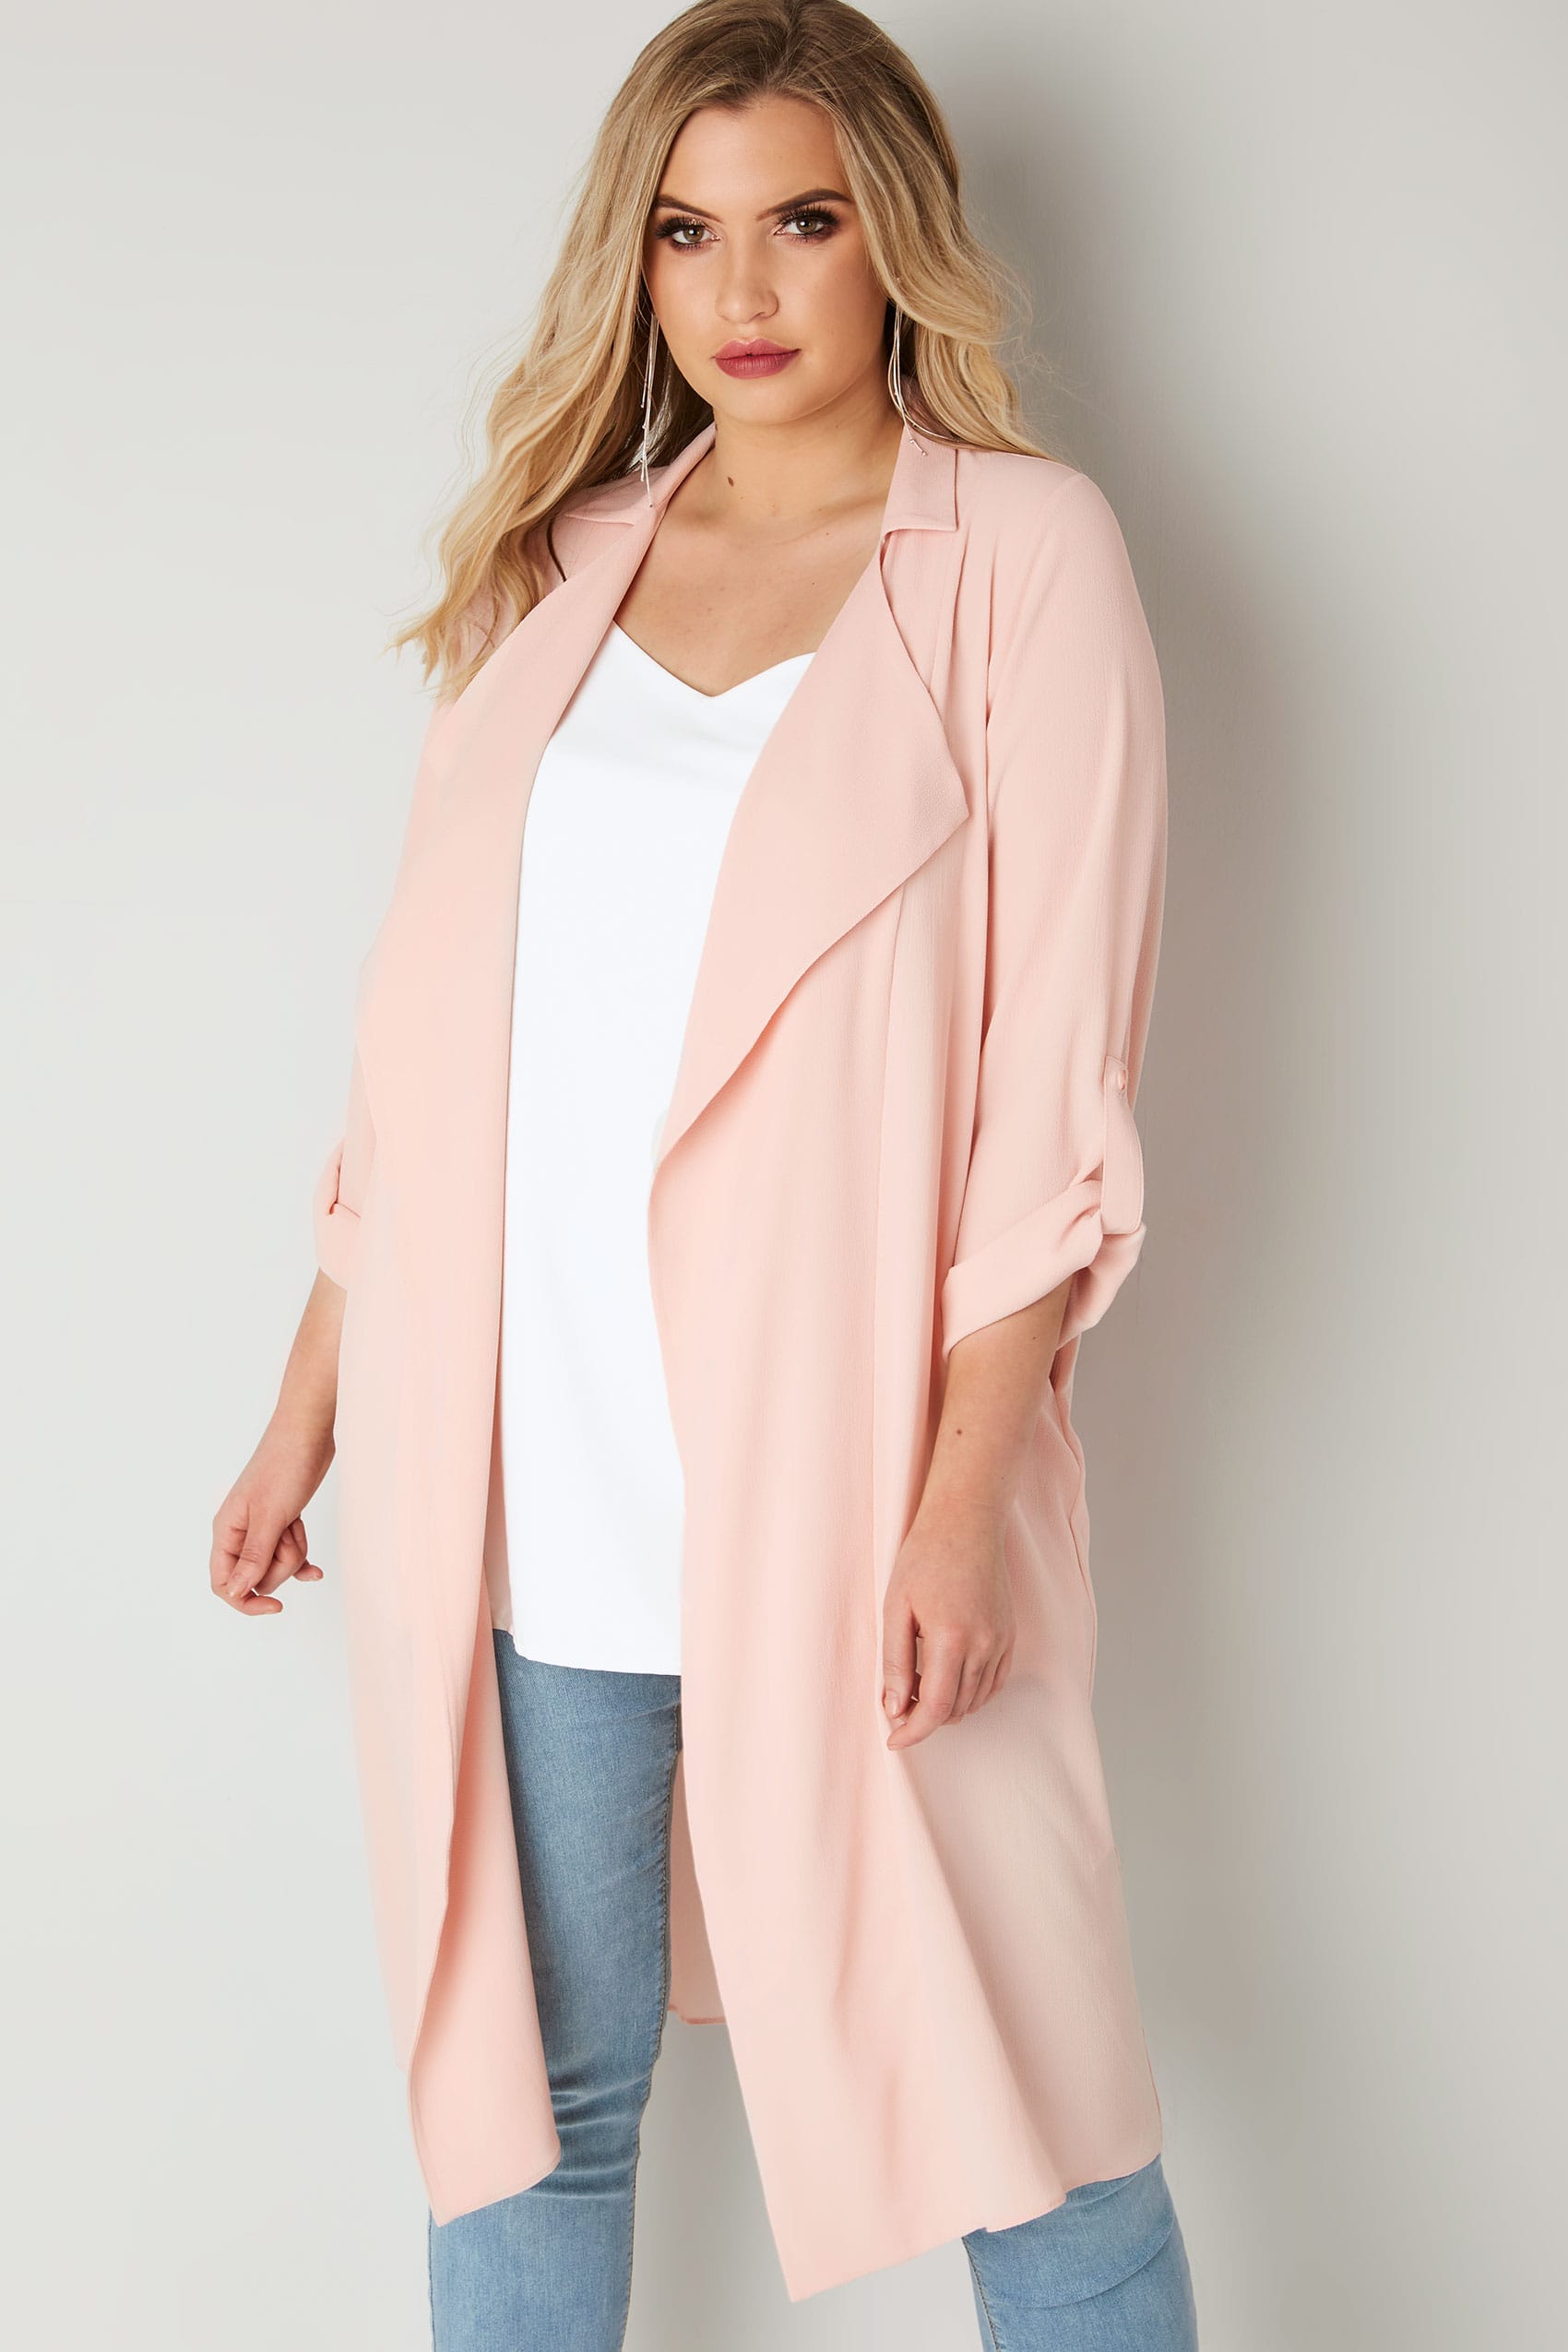 Light Pink Lightweight Duster Jacket With Waterfall Front, plus size 16 ...